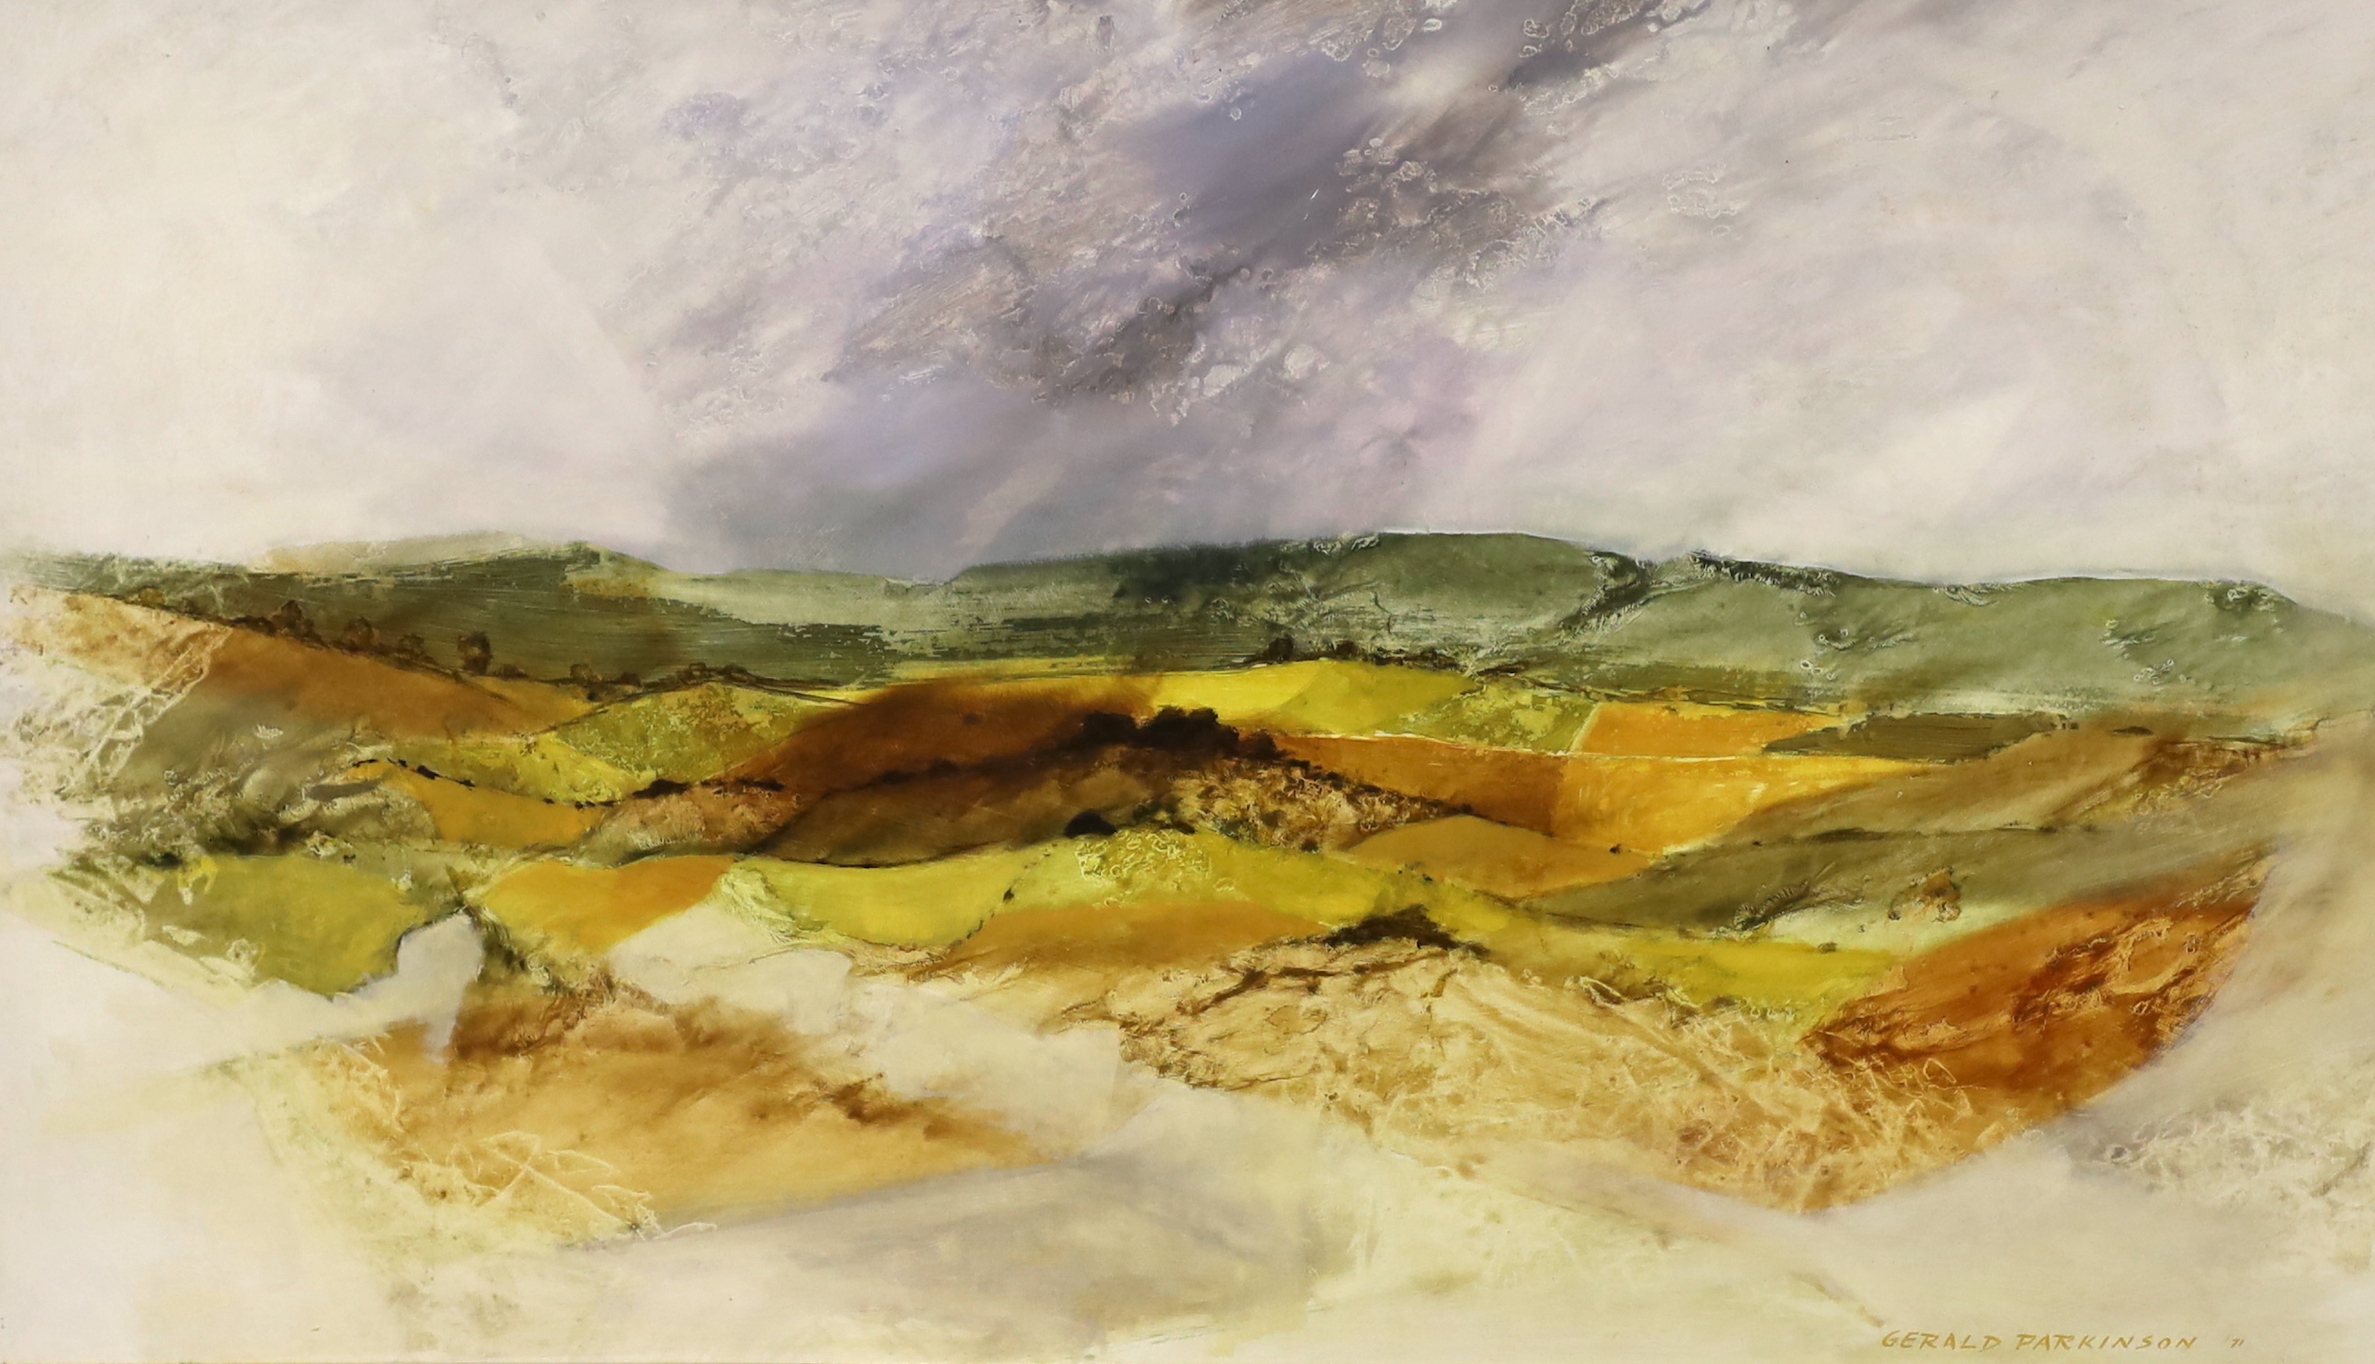 Gerald Parkinson (b.1926), oil on board, Downs landscape, signed and dated 1971, inscribed verso, 99 x 59cm